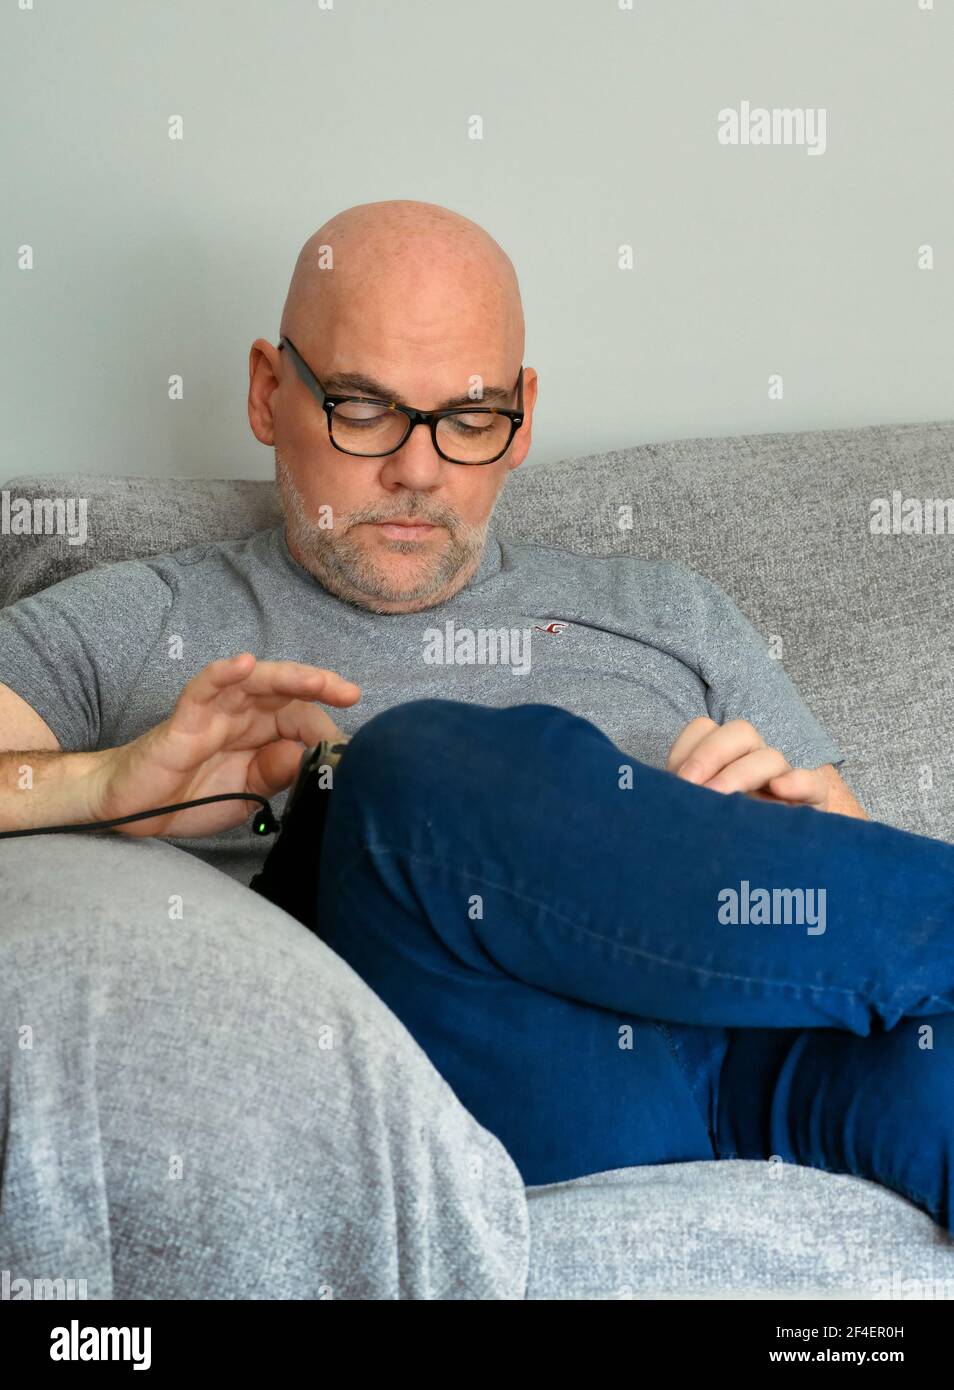 Bald headed middle-ages man sitting on sofa and looking down as he uses his iPad Stock Photo